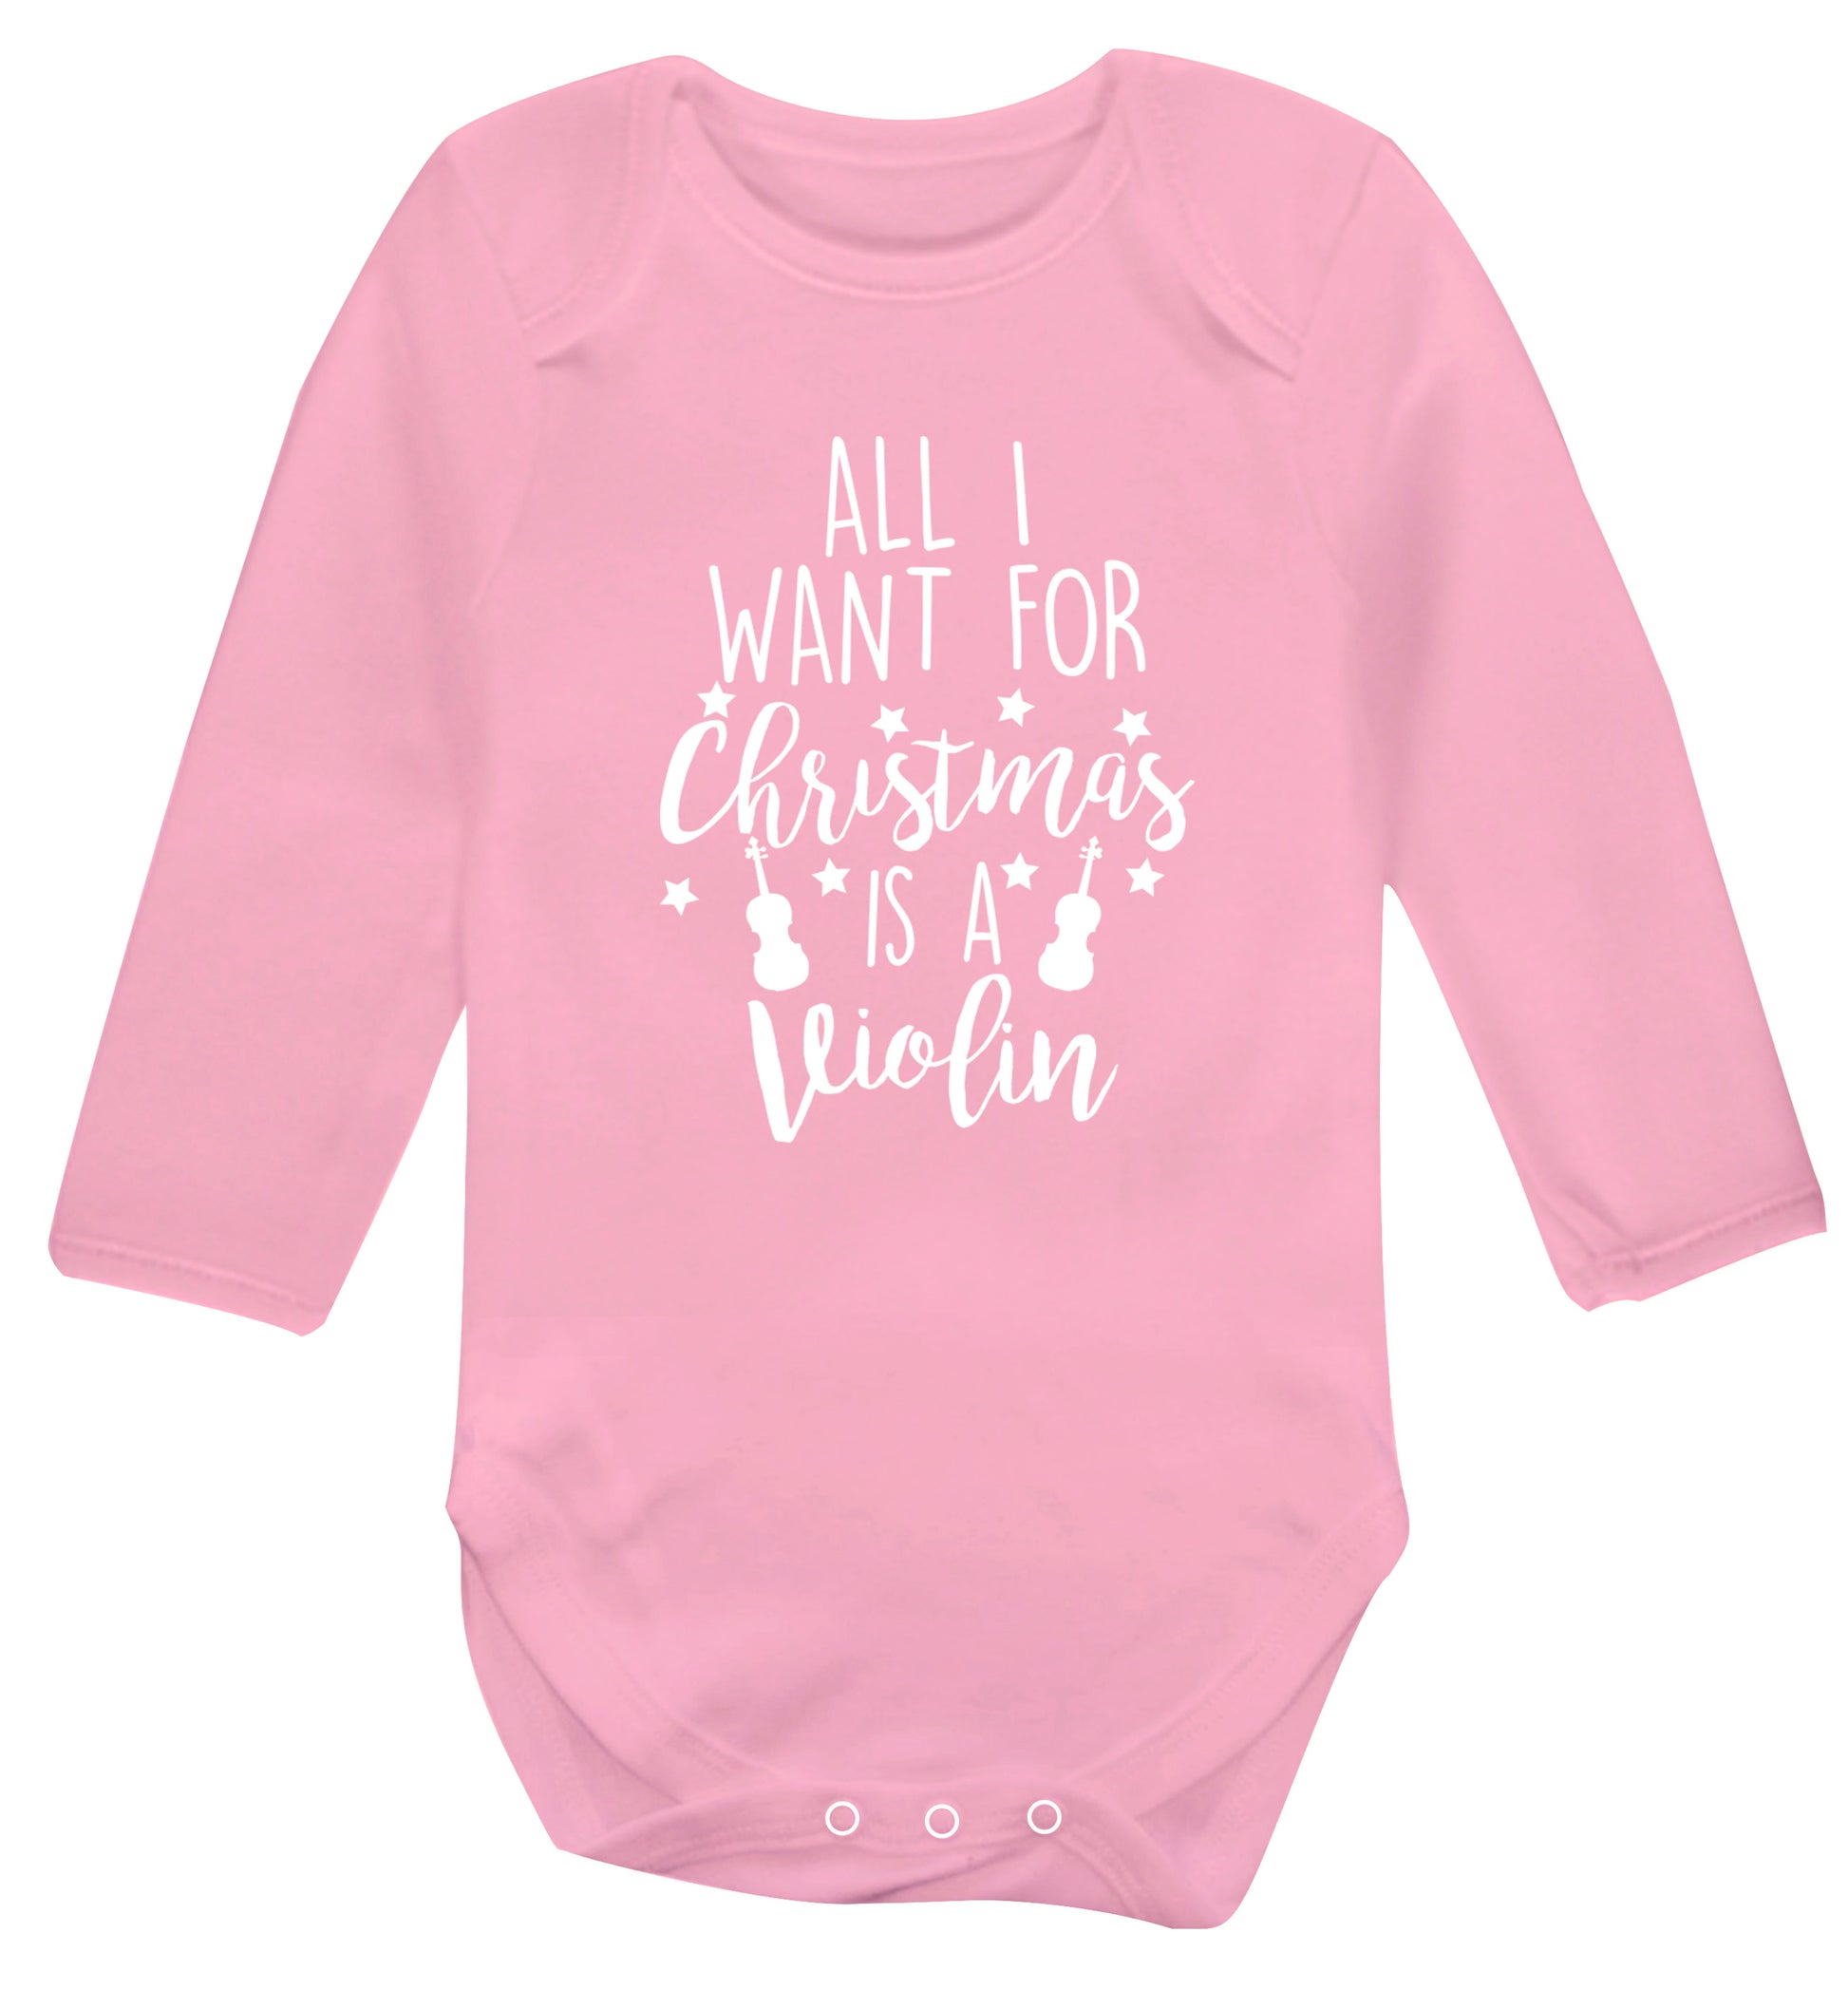 All I Want For Christmas is a Violin Baby Vest long sleeved pale pink 6-12 months